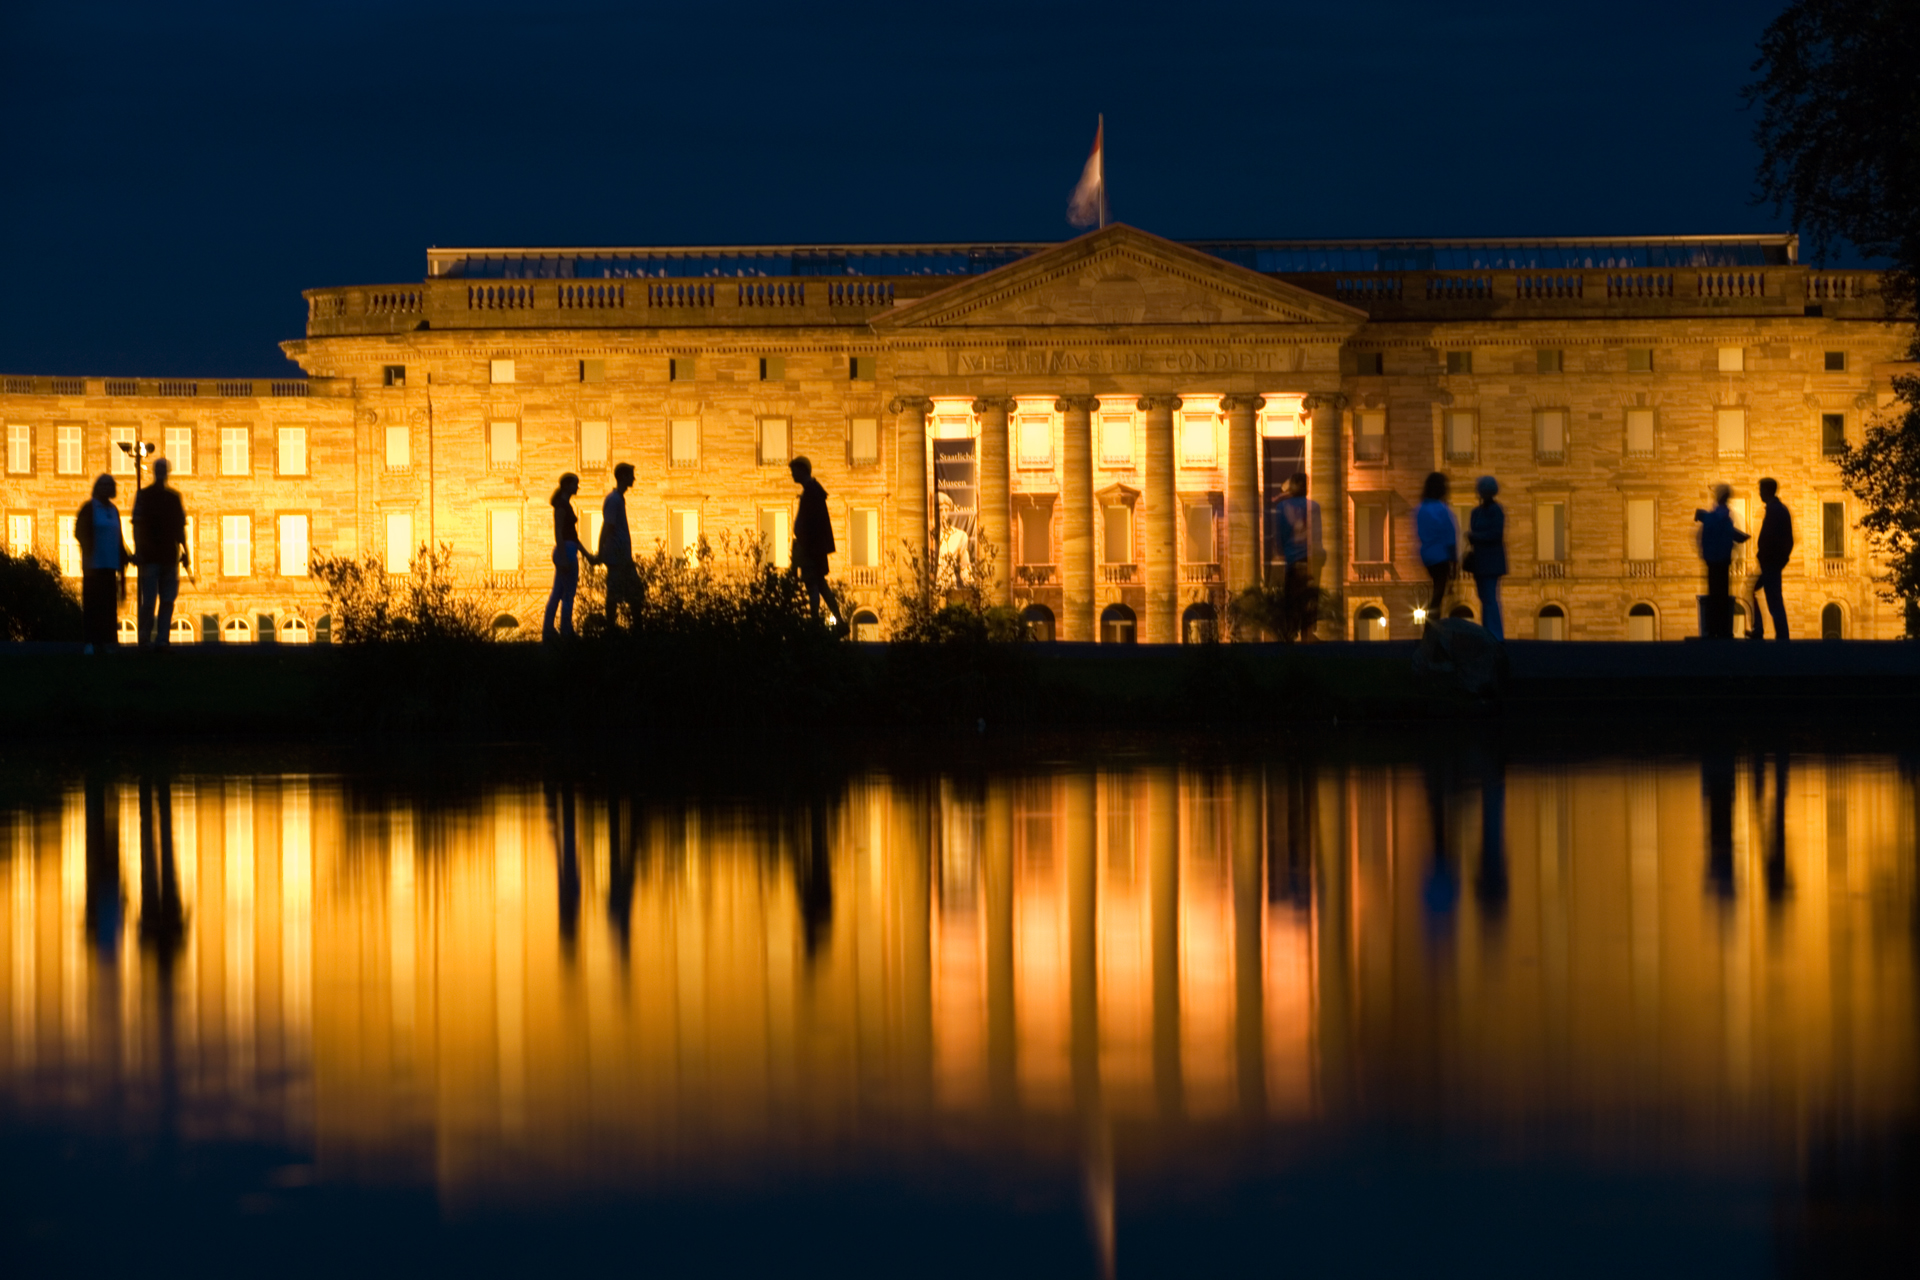  As evening descends, the lights of the Schloss Wilhelmshöhe are reflected in a small park lake.   Kassel, Germany  